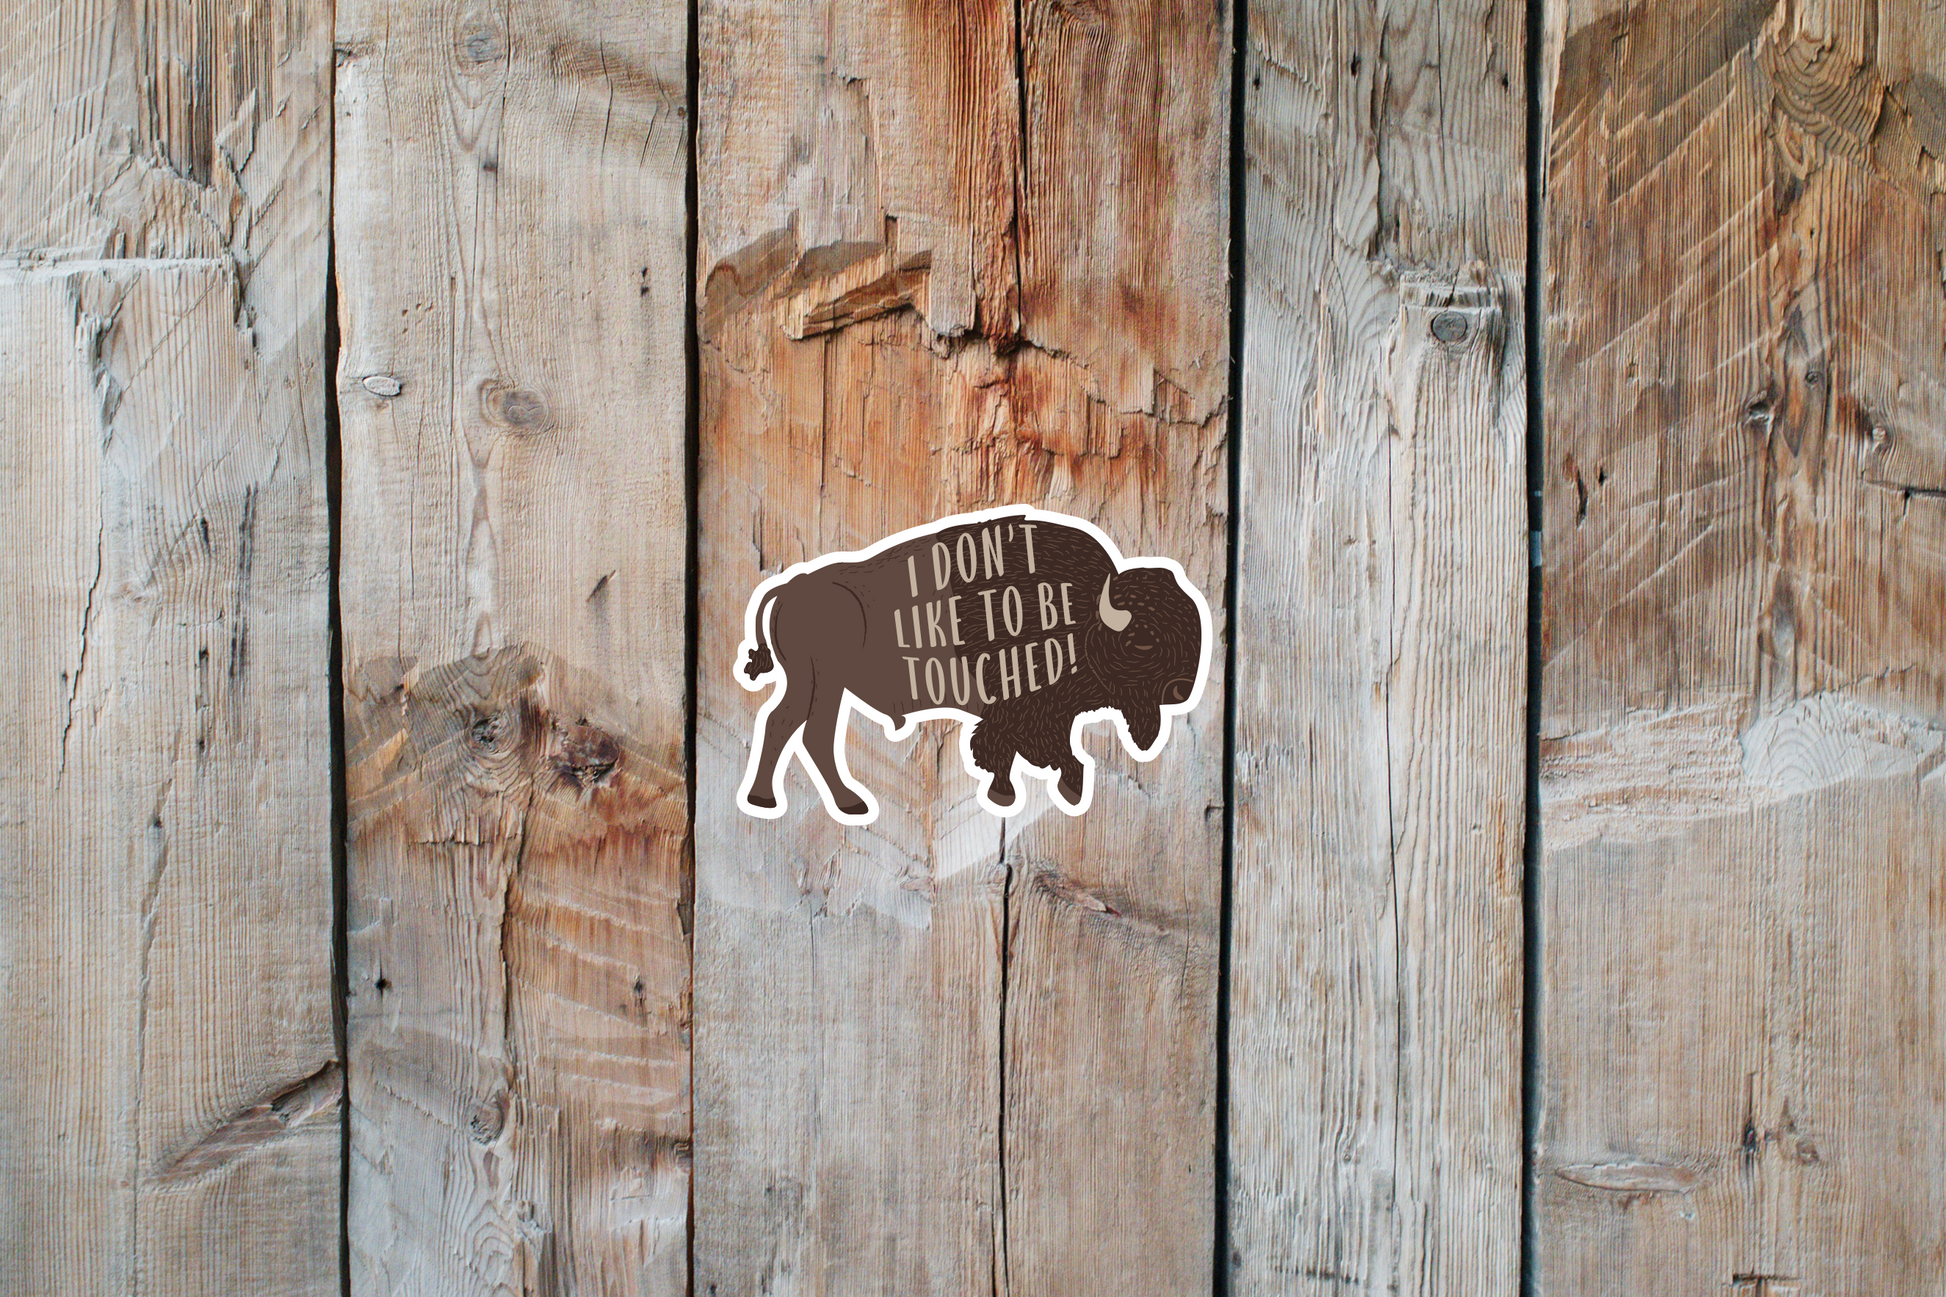 Bison Sticker | I don't like to be touched Bison Sticker | I don't like to be touched Buffalo Sticker 